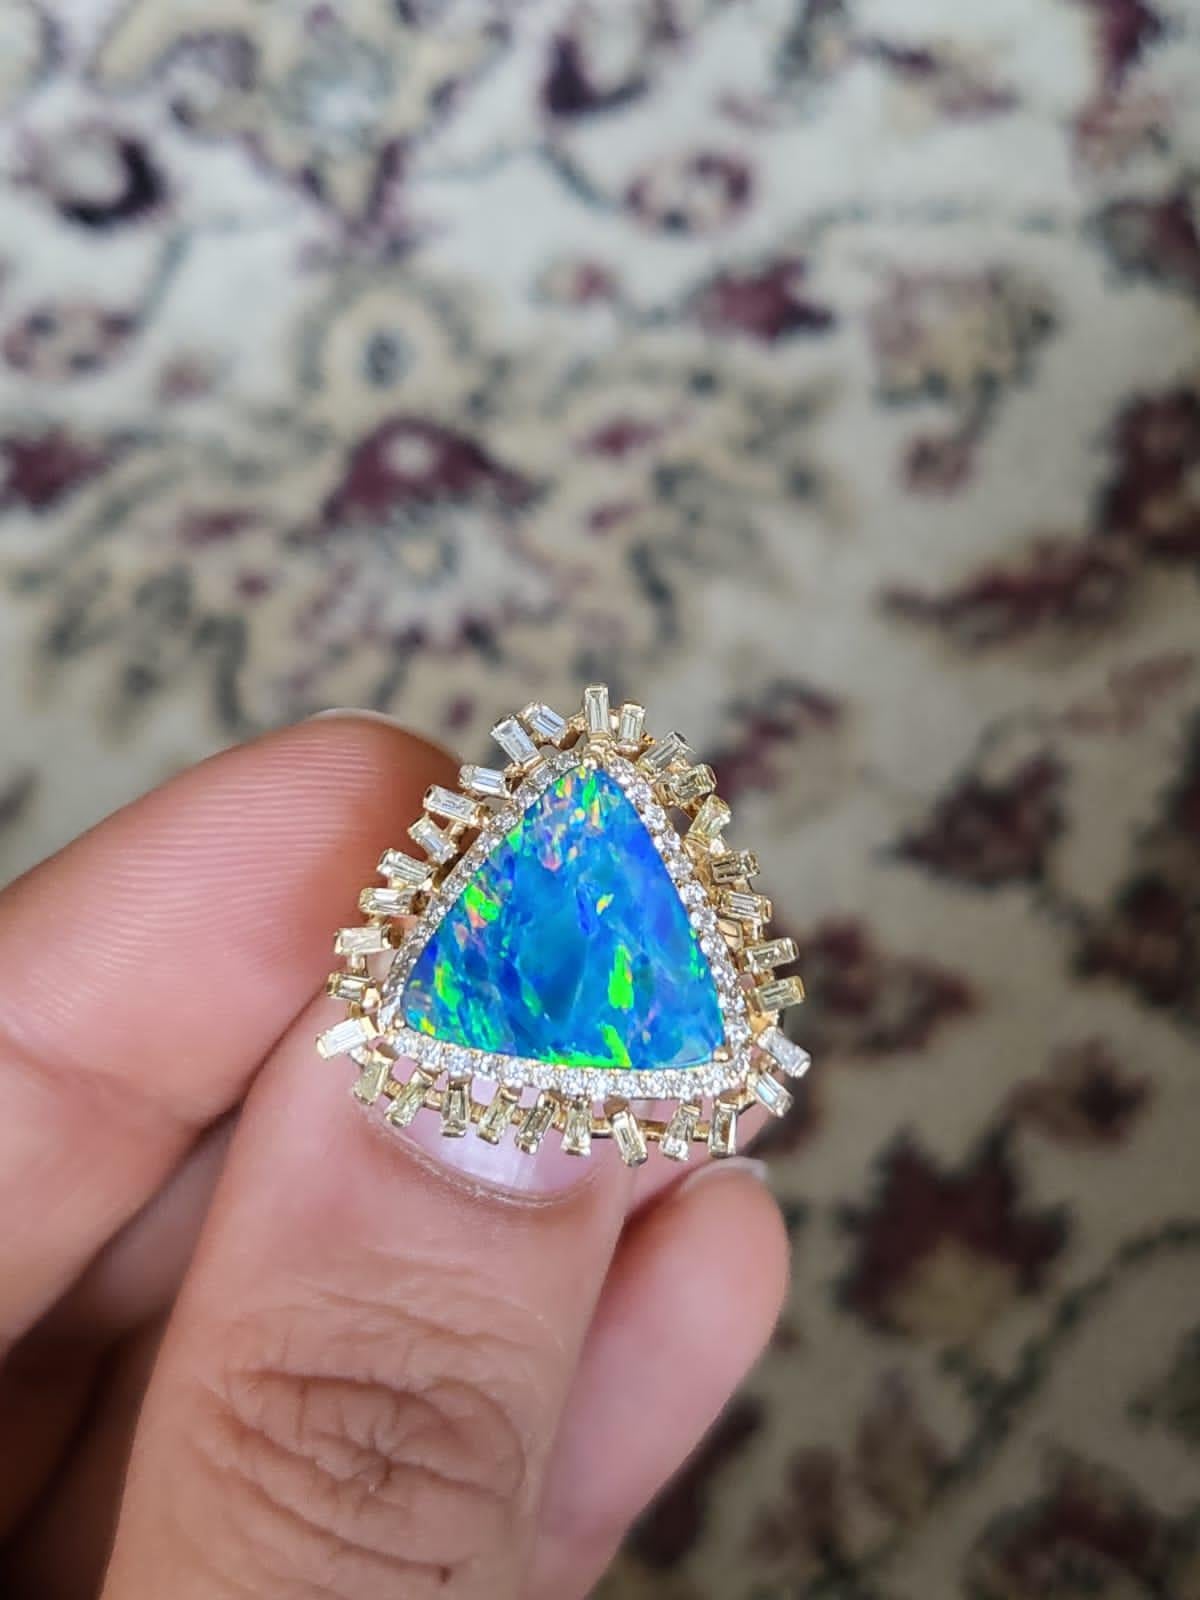 A very gorgeous and one of a kind, Australian Doublet Opal Ring set in 18K Yellow Gold & Diamonds. The weight of the Australian Doublet Opal is 3.18 carats. All the pictures of the ring are taken in plain daylight, and no other lightning equipment